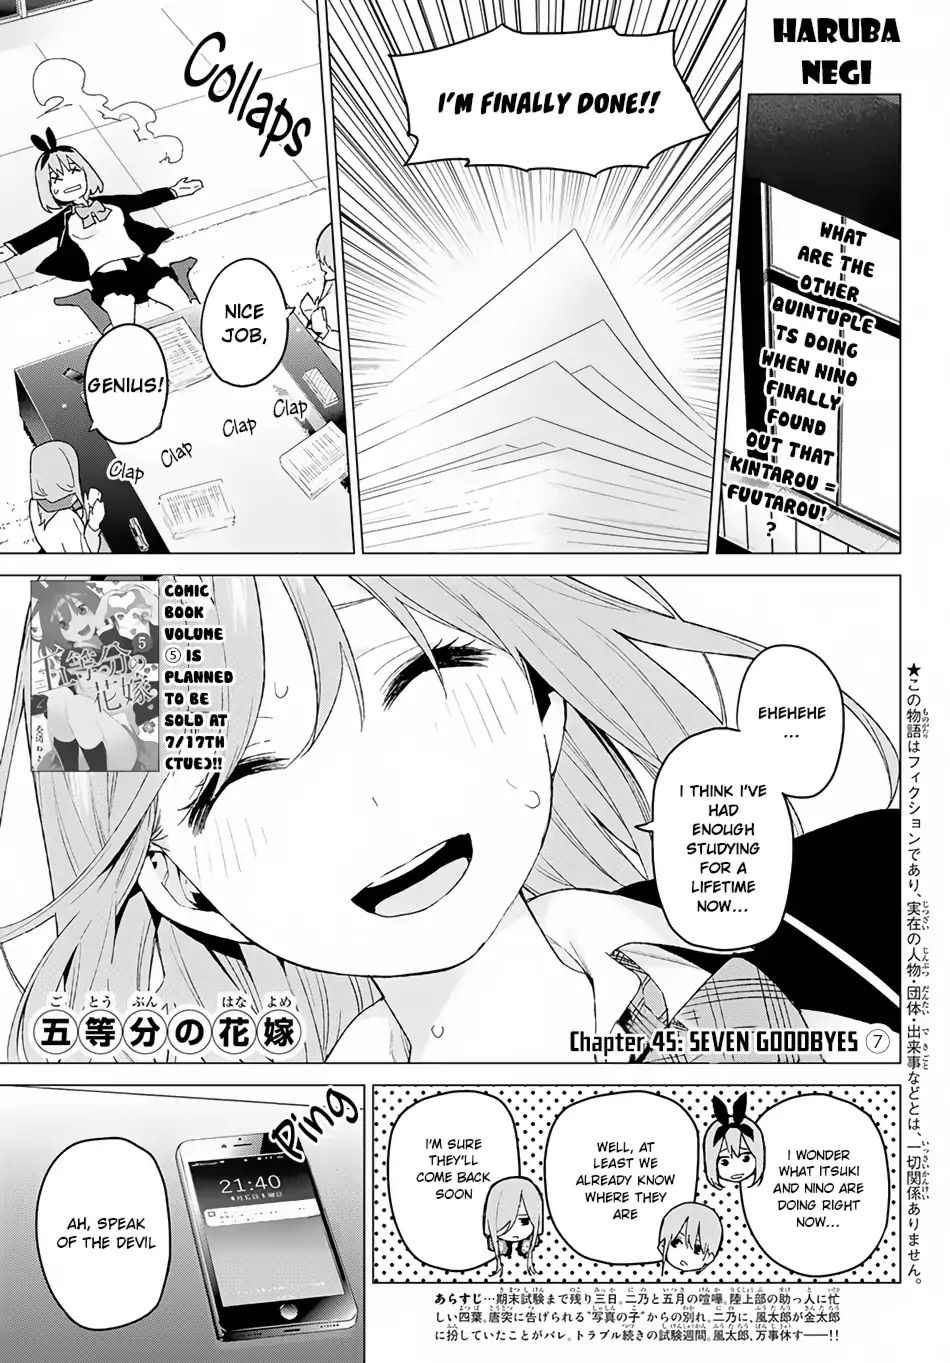 Go-Toubun No Hanayome Chapter 45: Seven Goodbyes ⑦ - Picture 2